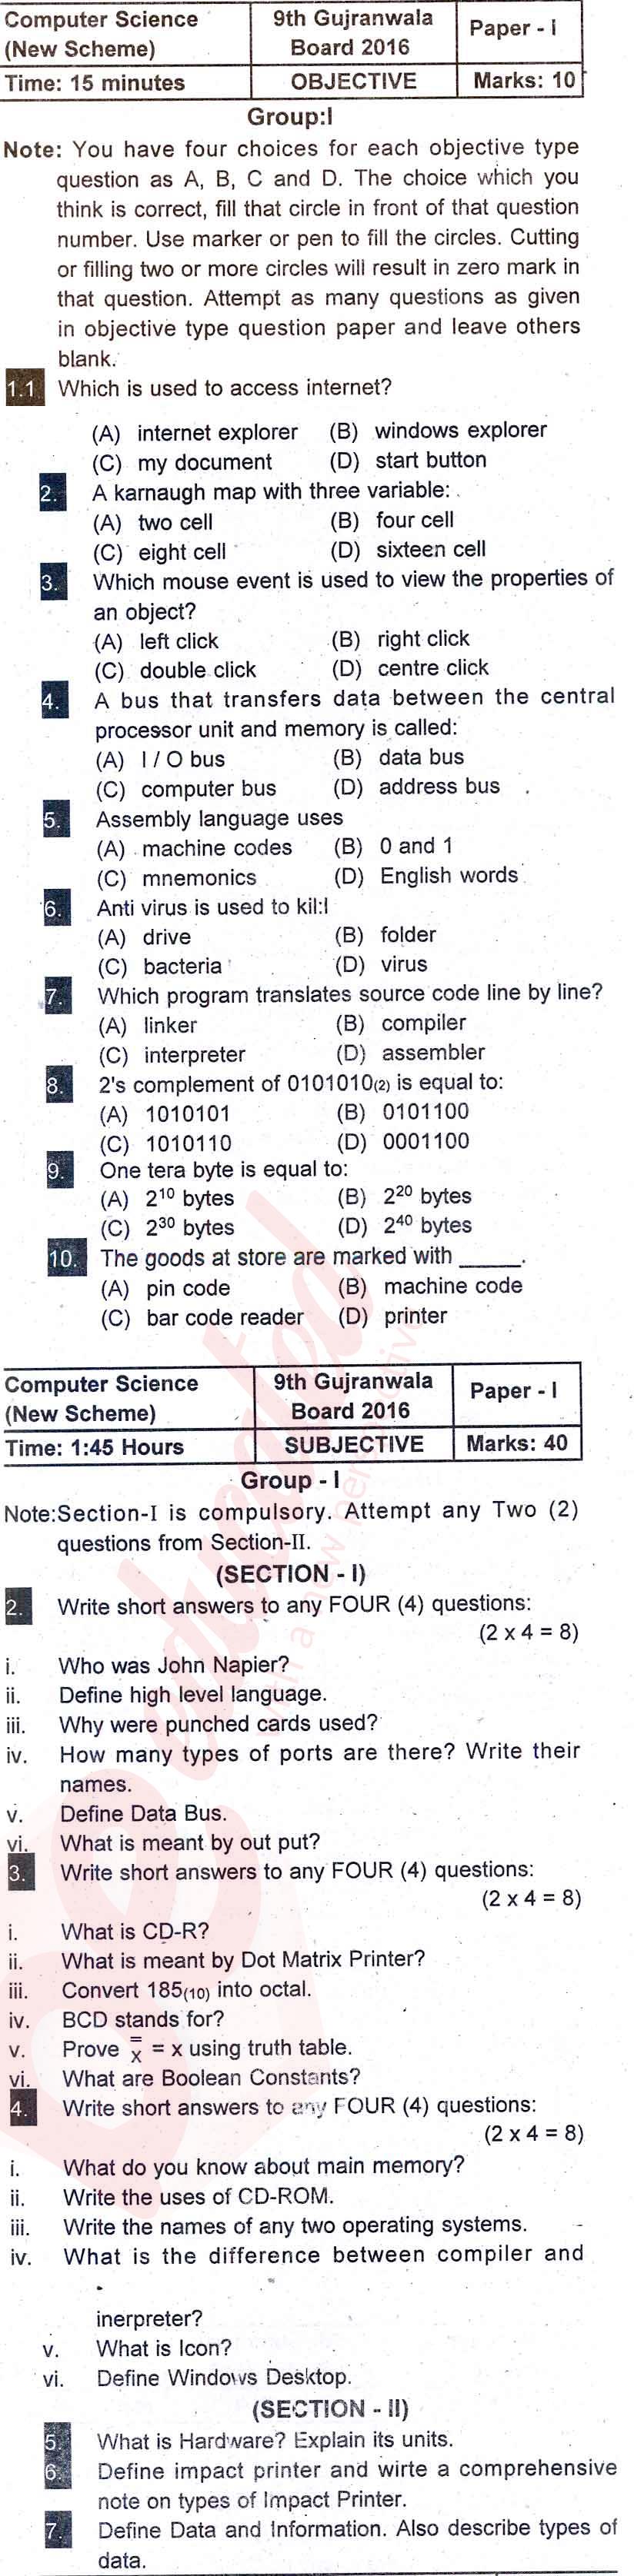 Computer Science 9th English Medium Past Paper Group 1 BISE Gujranwala 2016